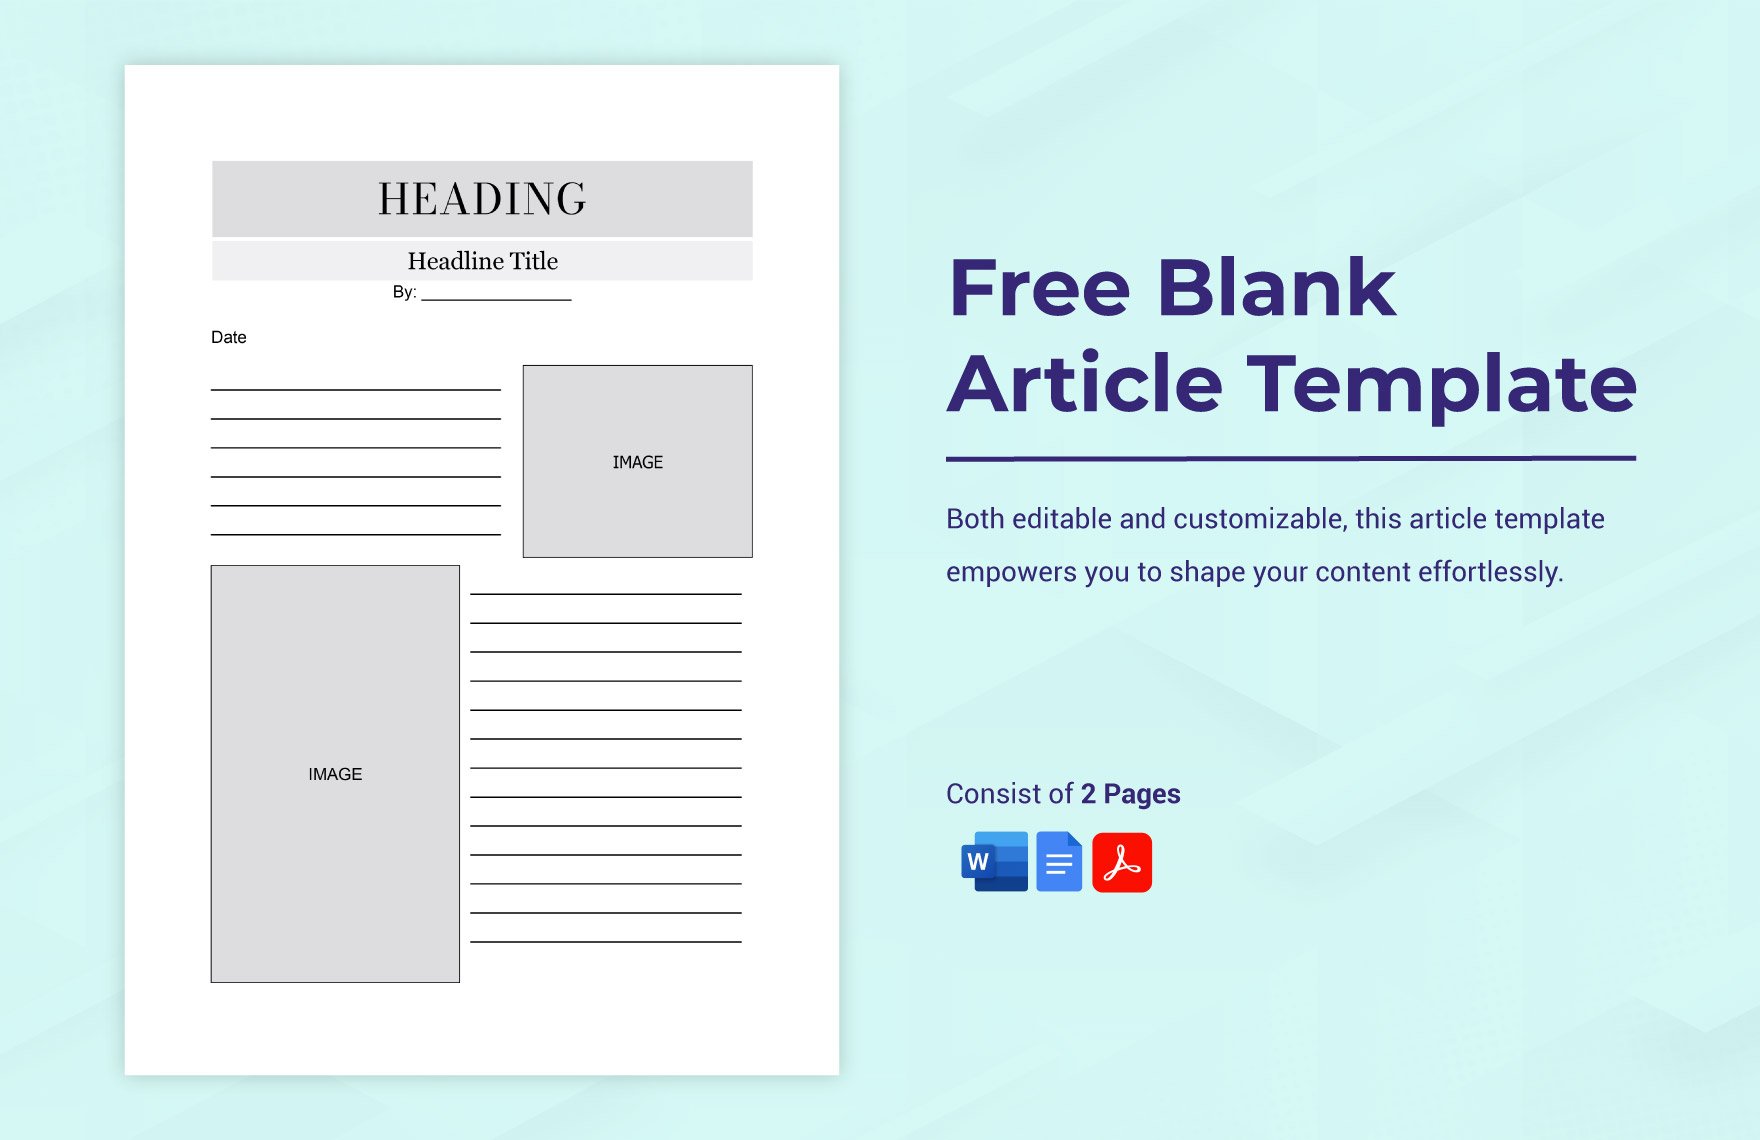 free-blank-article-template-download-in-word-google-docs-pdf